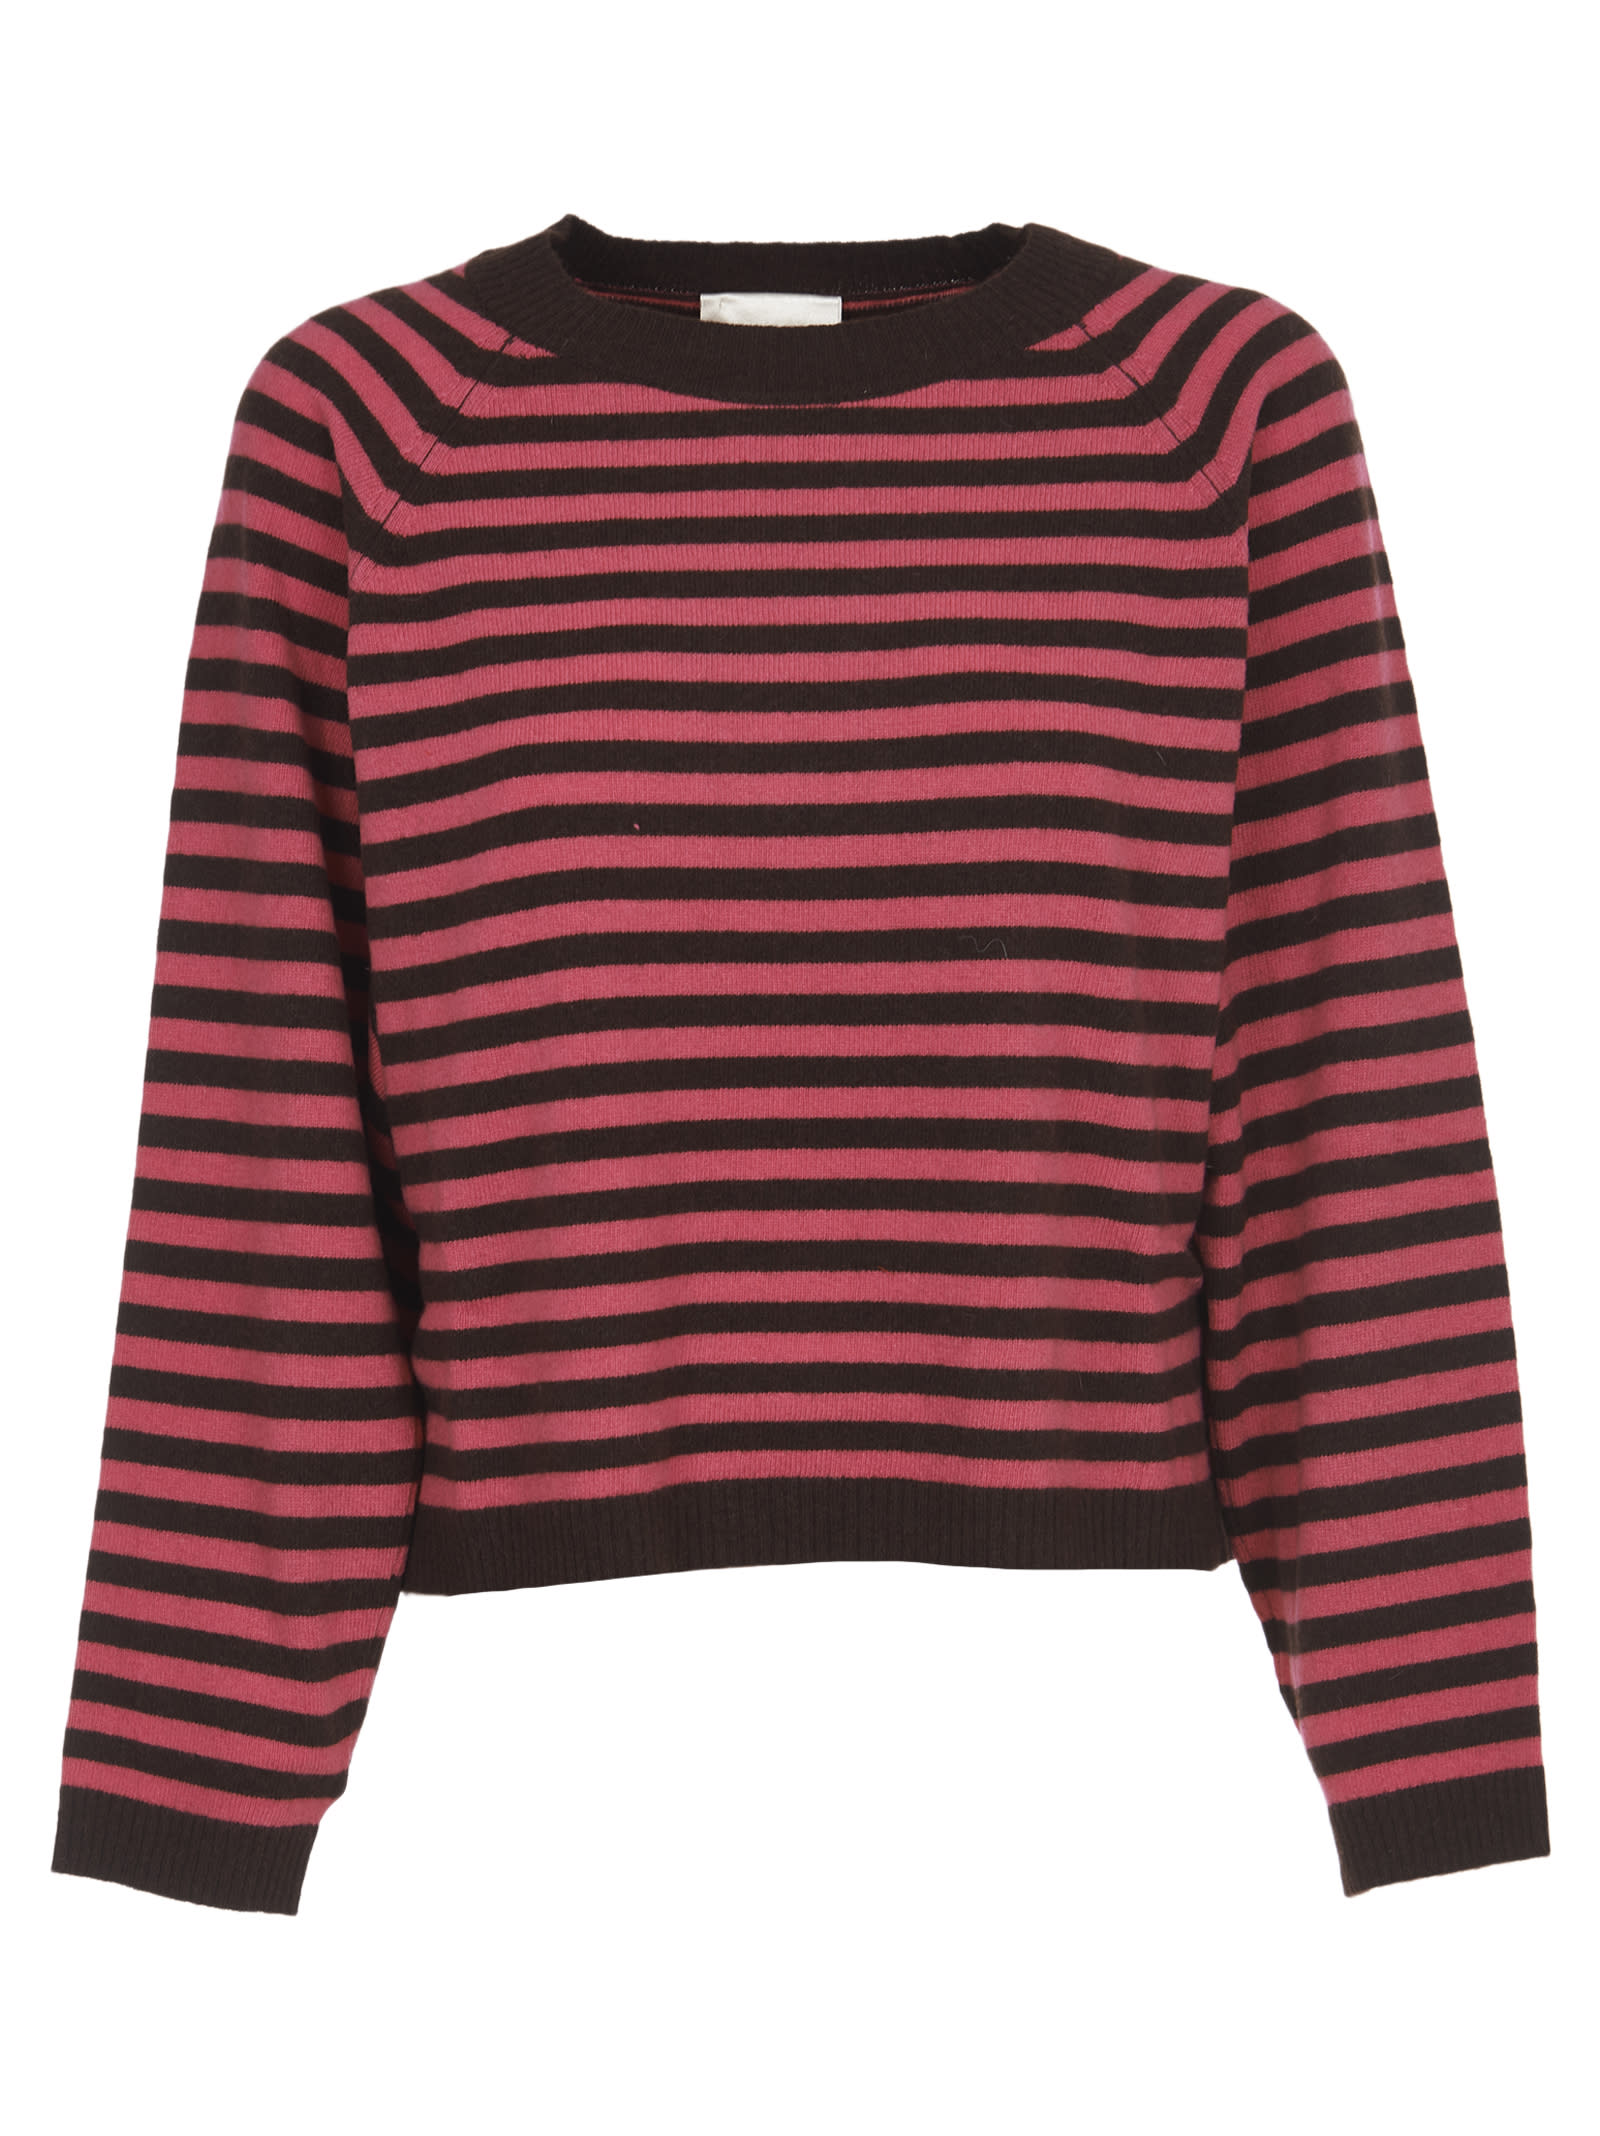 SEMICOUTURE Pink And Black Striped Sweater